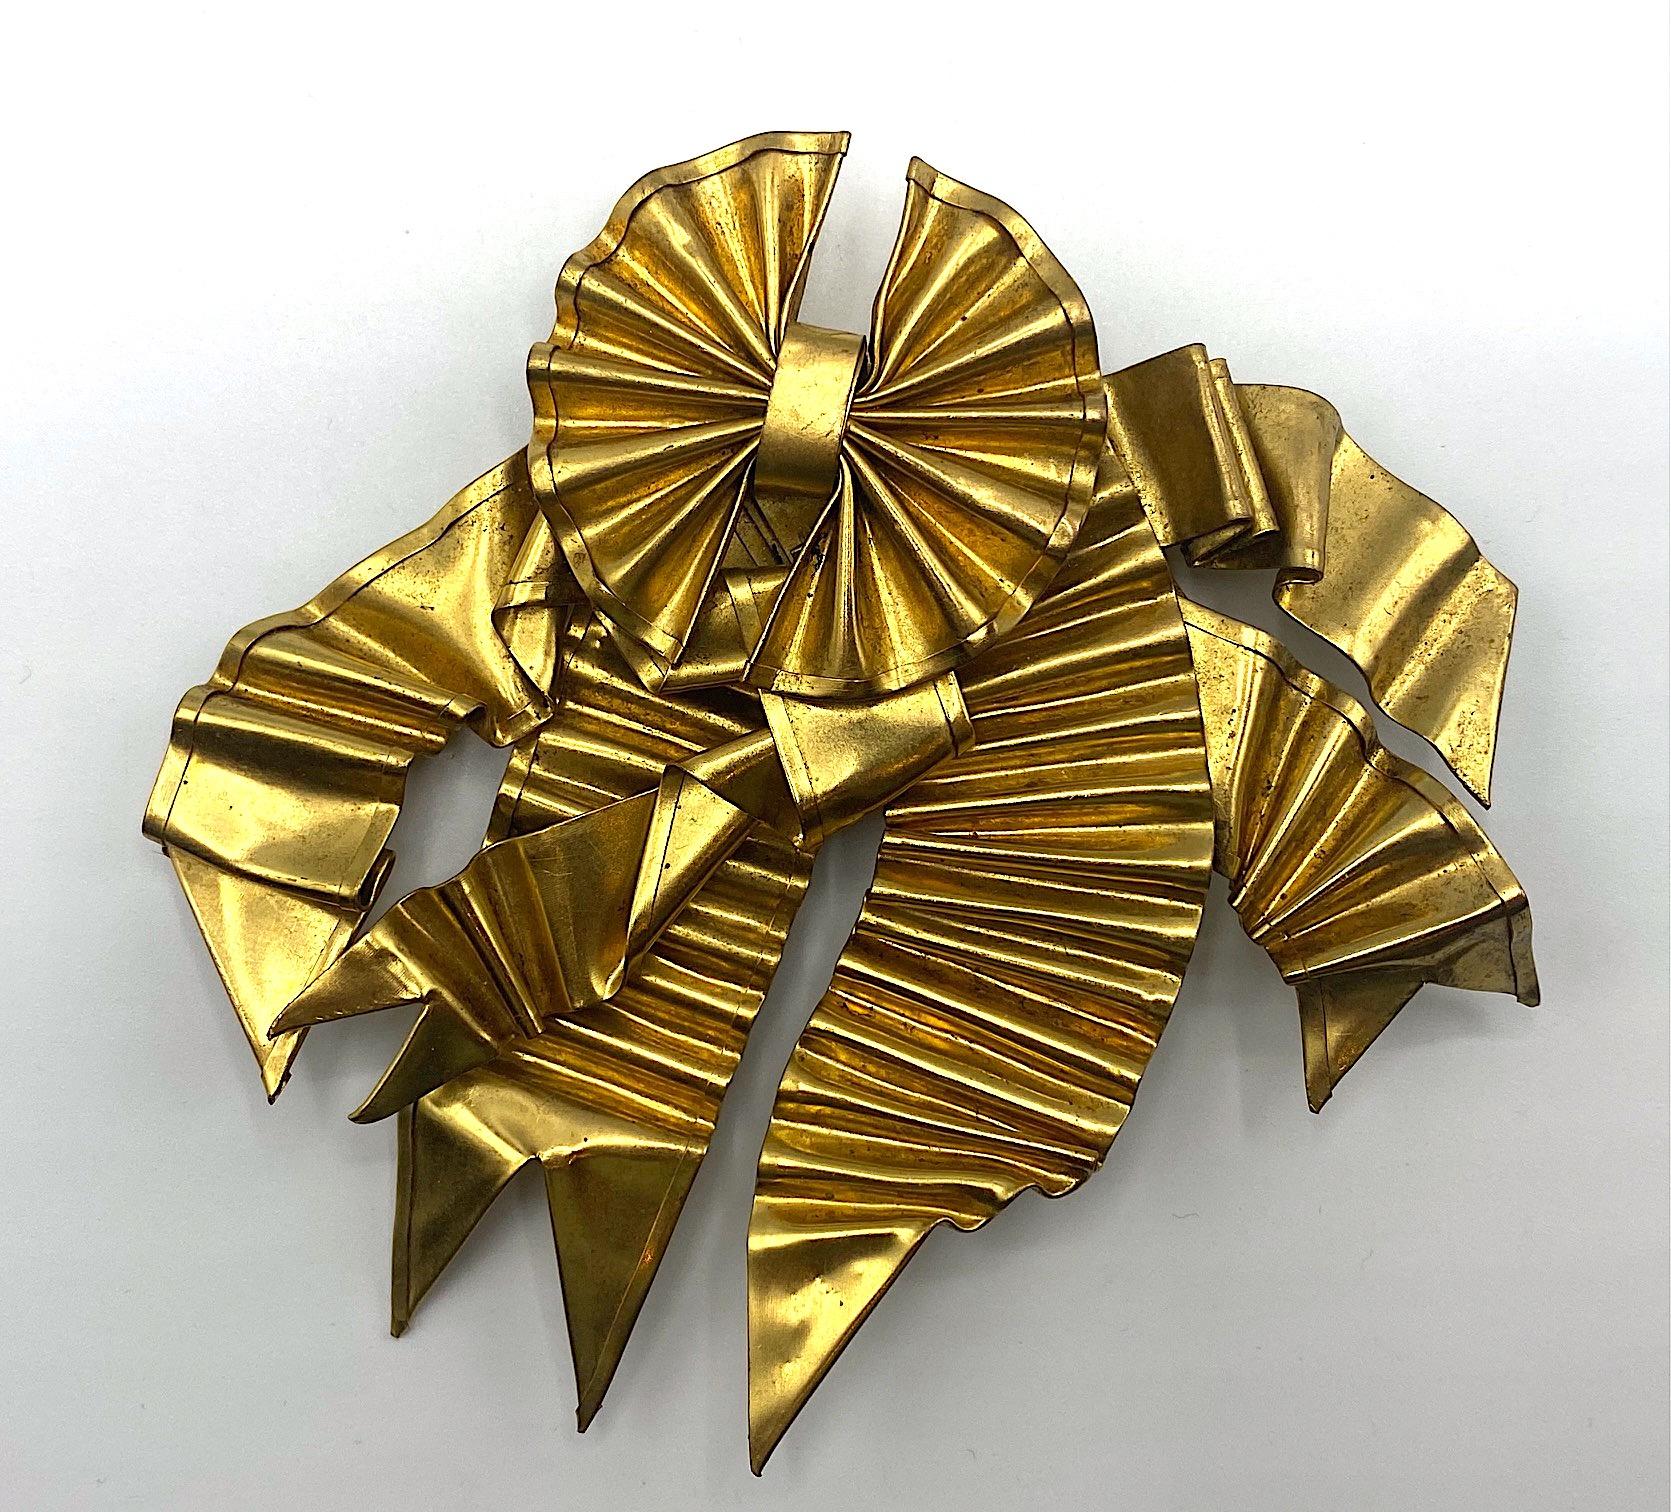 An exceptional and rare 1980s large brooch by important French jewelry designer Patrick Retif (1958 - 1991). It is hand made of folded metal ribbons and gold plated. The brooch is 4.25 inches wide, 4 inches long and .5 of an inch deep. The back has